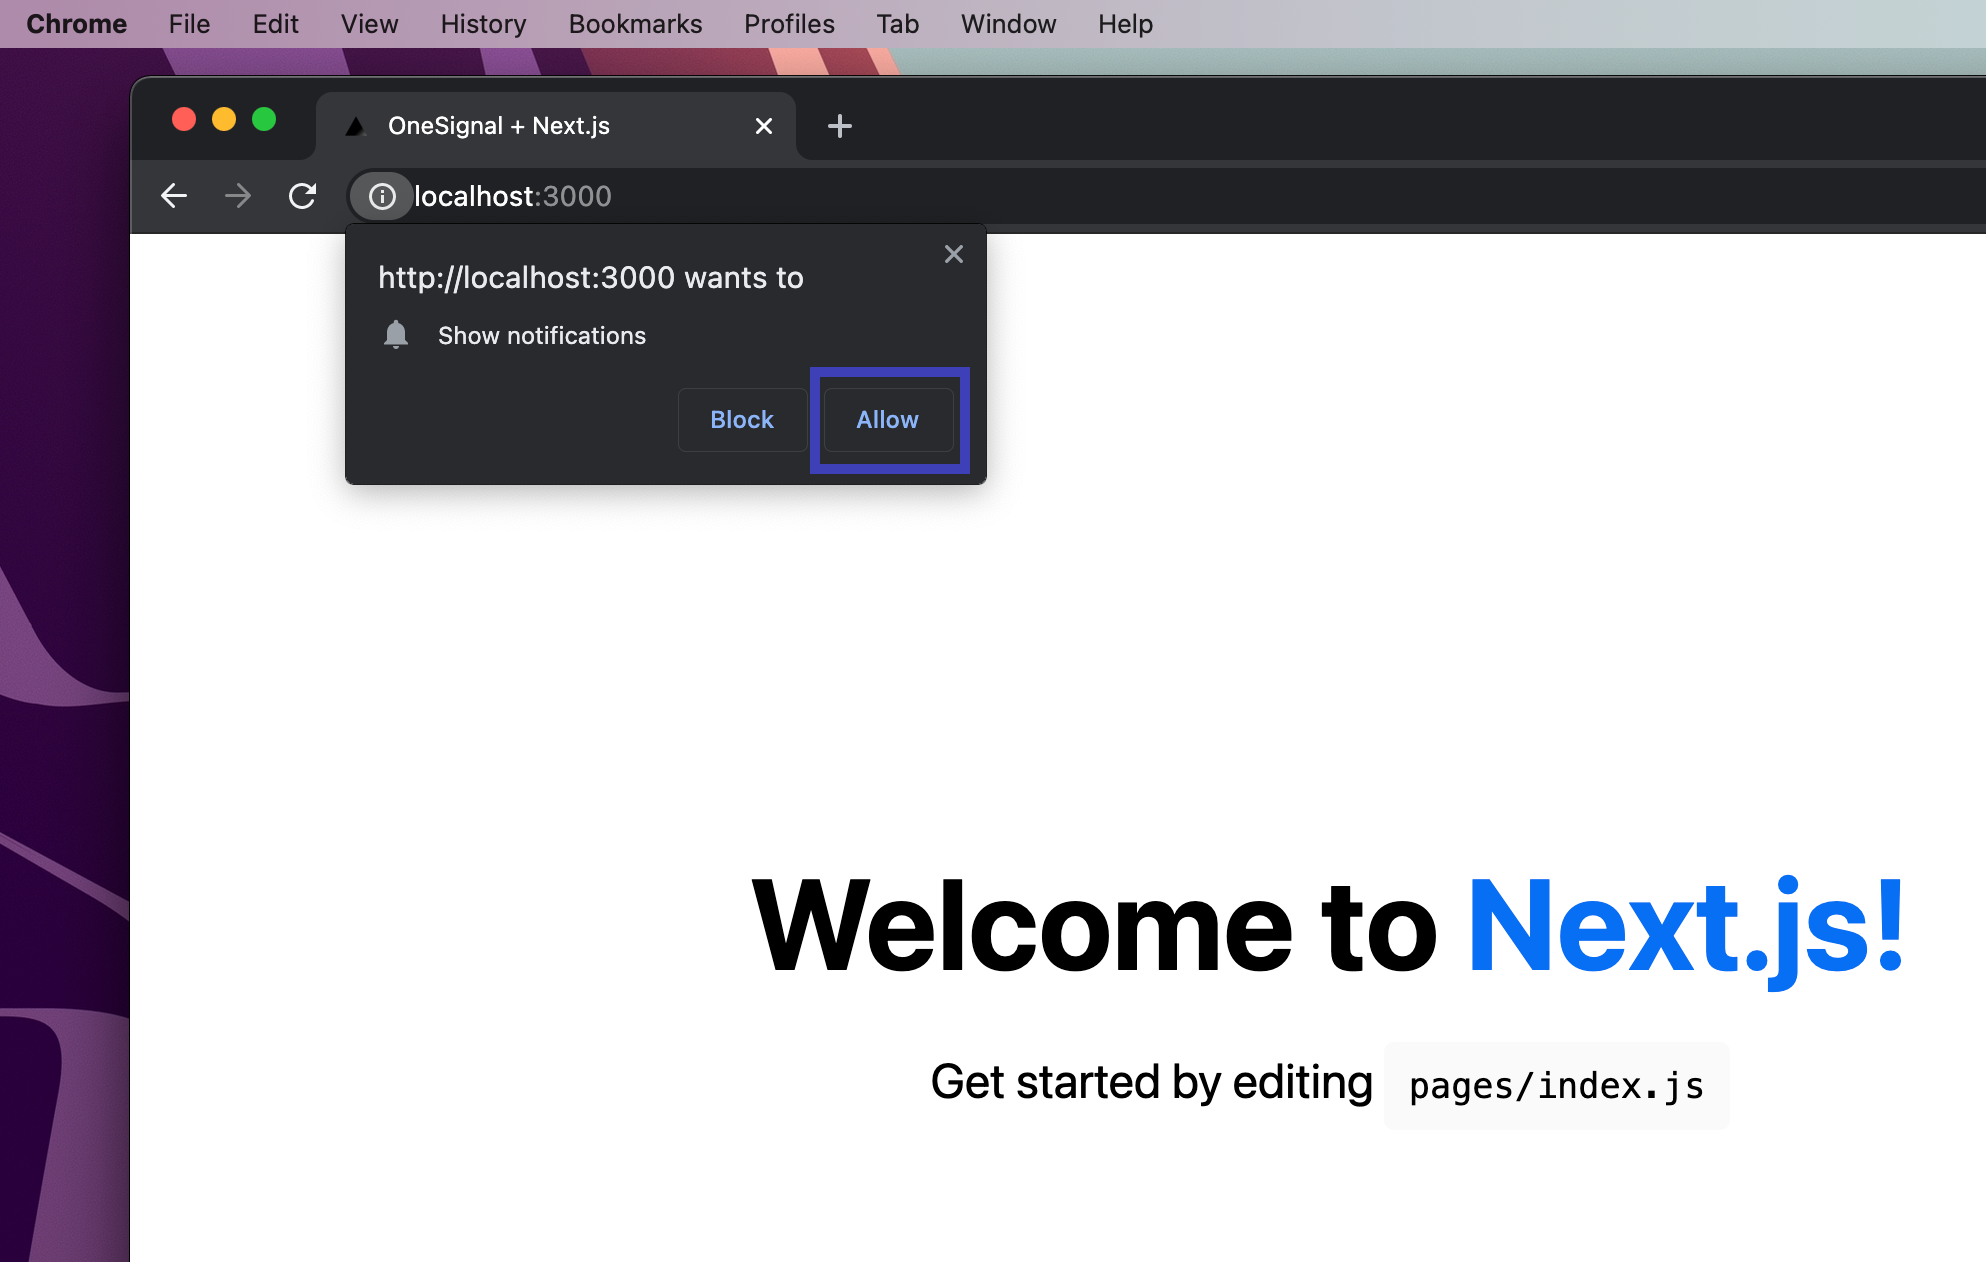 How to Integrate OneSignal into a Next.js App